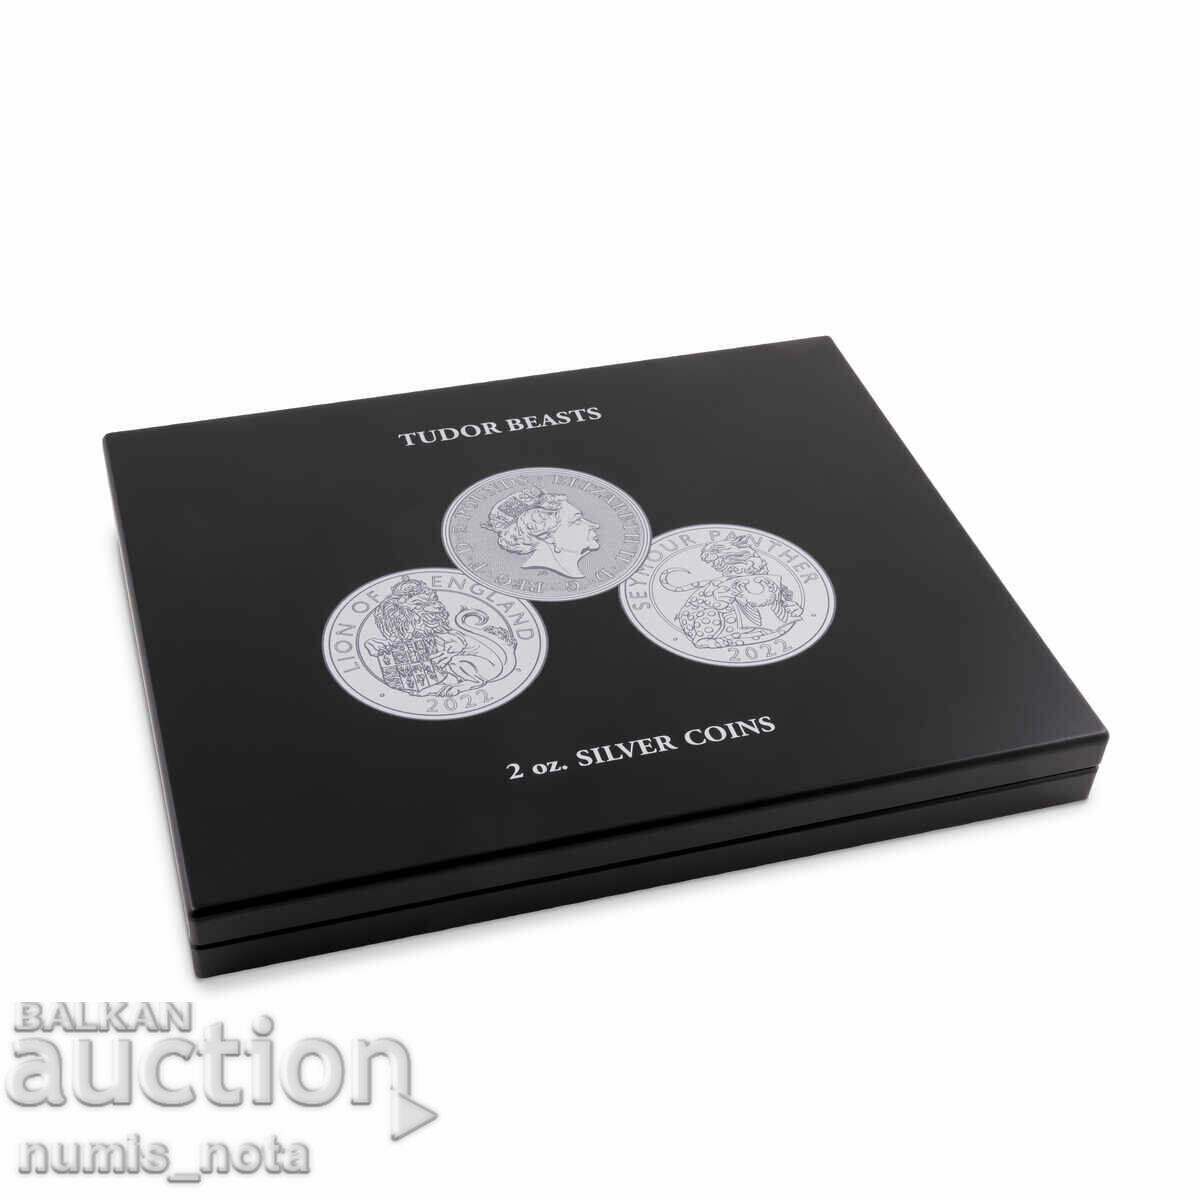 deluxe box for 10 coins The Beasts of the Tudors 2 oz